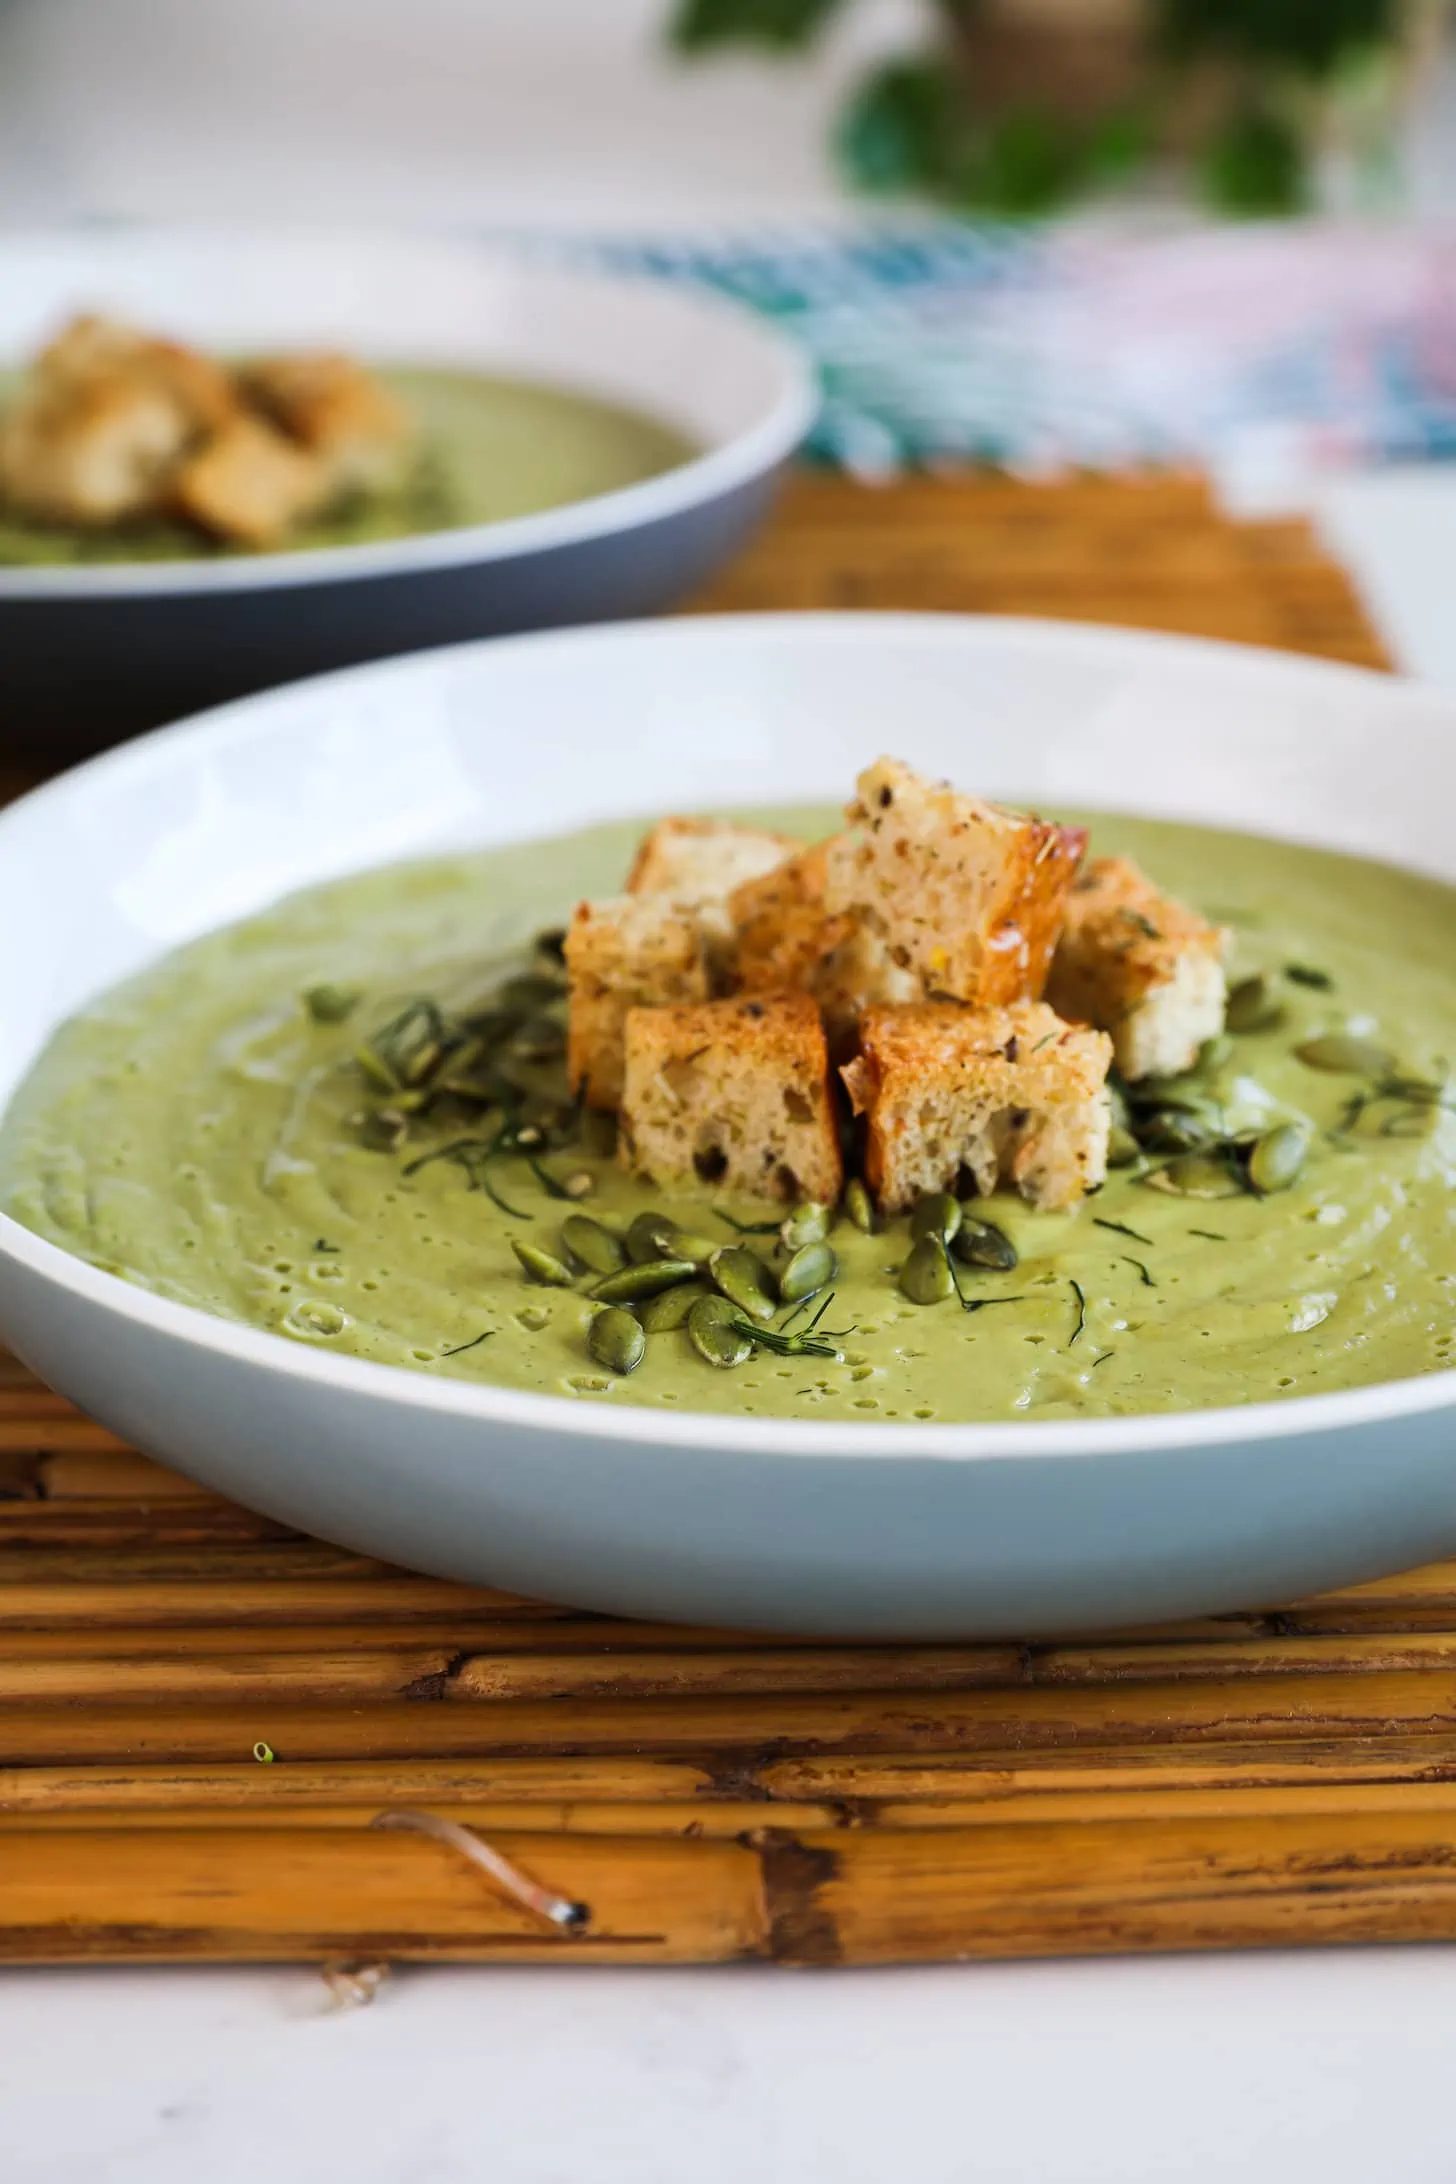 Perspective image of a bowl of green soup topped with croutons and seeds.